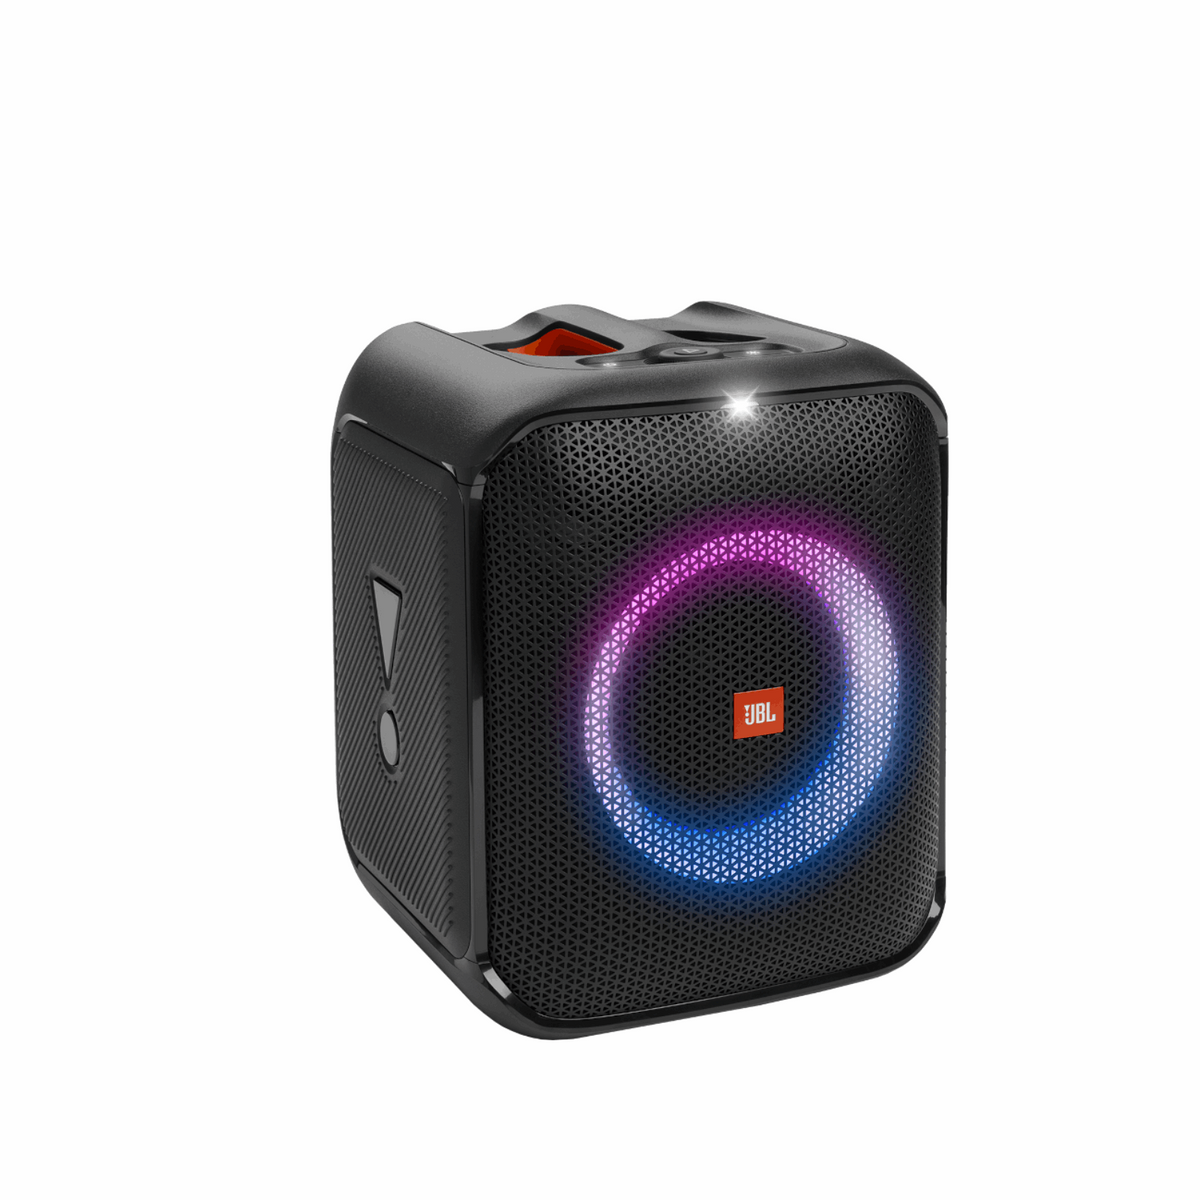 JBL PARTYBOX ENCORE ESSENTIAL Portable party speaker with powerful 100W sound, built-in dynamic light show, and splash proof design.